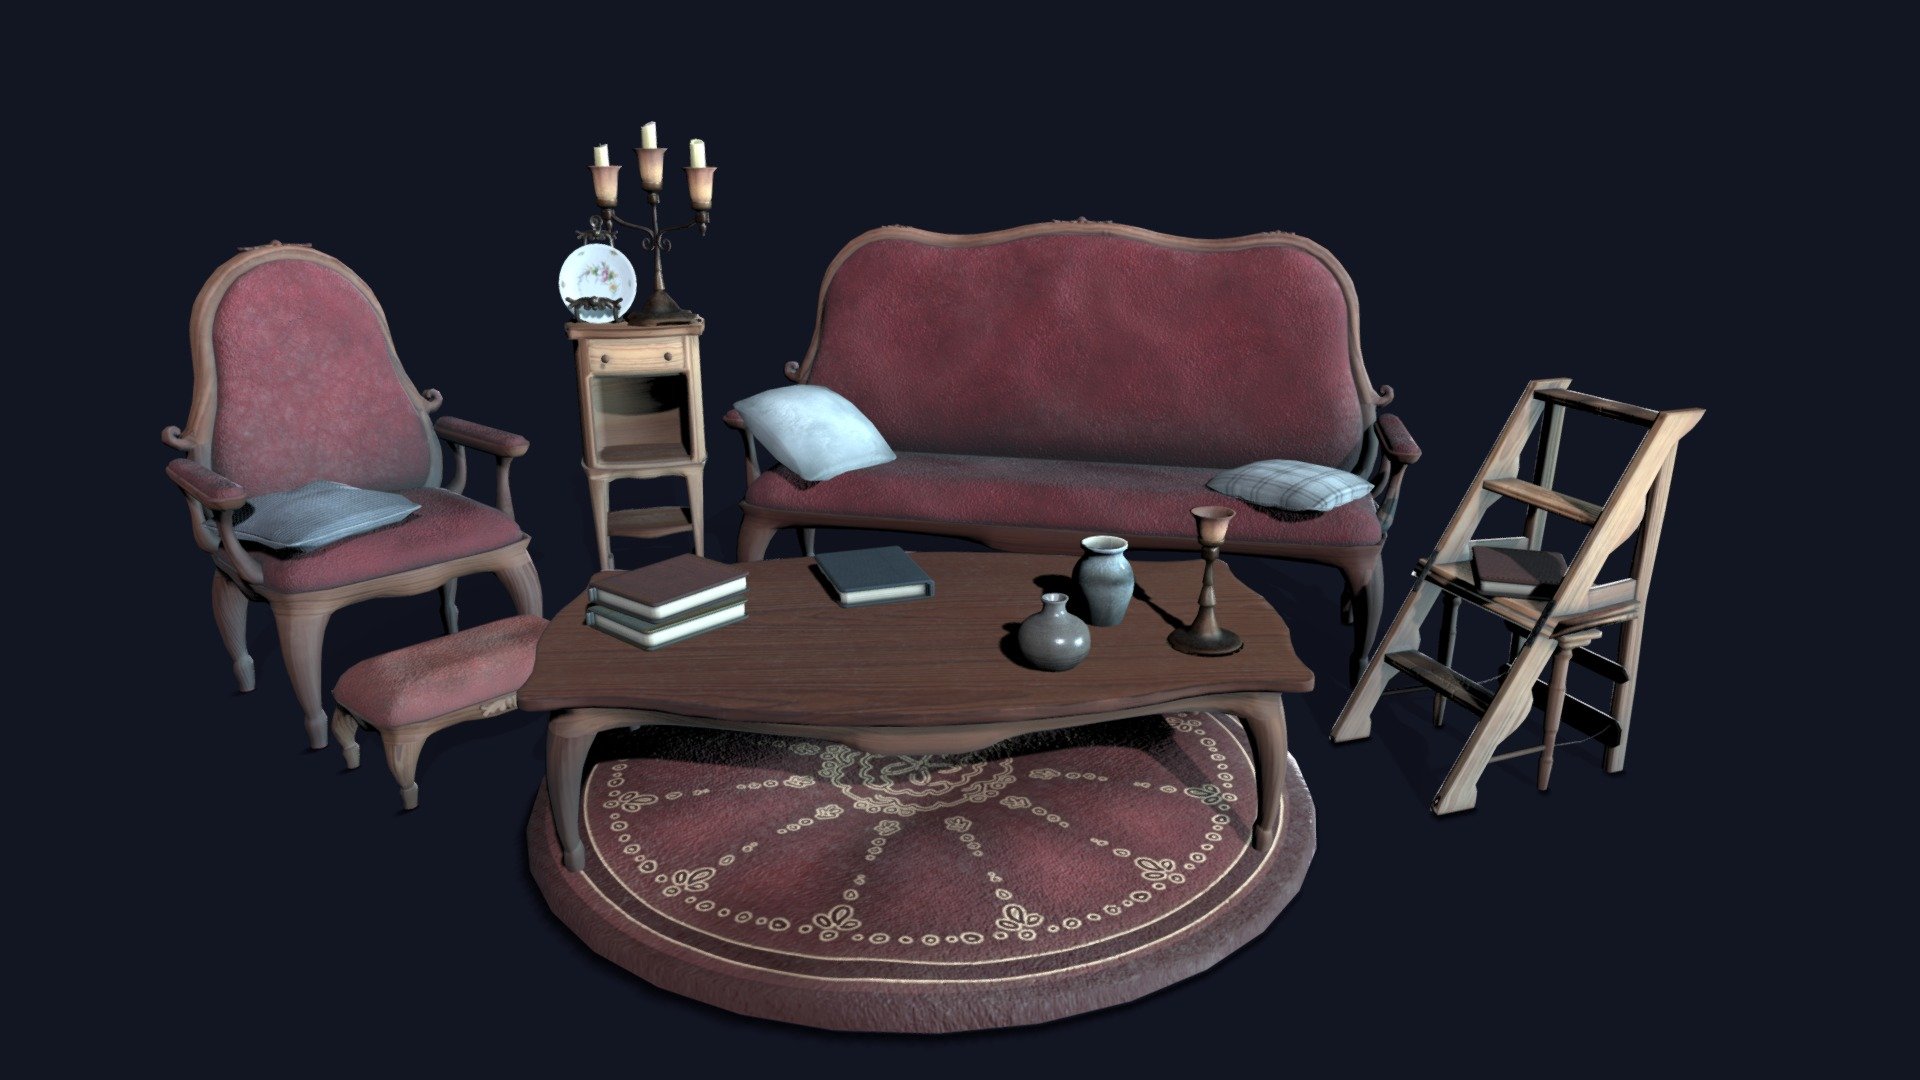 Assets created for a school project at the HEAJ called Glint! I was in charge of all of the non-modular props, most of them not included in this picture. Did all of the process, from concepting, to modeling, to texturing and integrating in unity. I do not know if I'm allowed to disclose more about the game, so I will not.

All of the textures are handmade with pictures I took and a bit of Photoshop magic :]

Said school project still isn't done, so I might post some more in the future 3d model